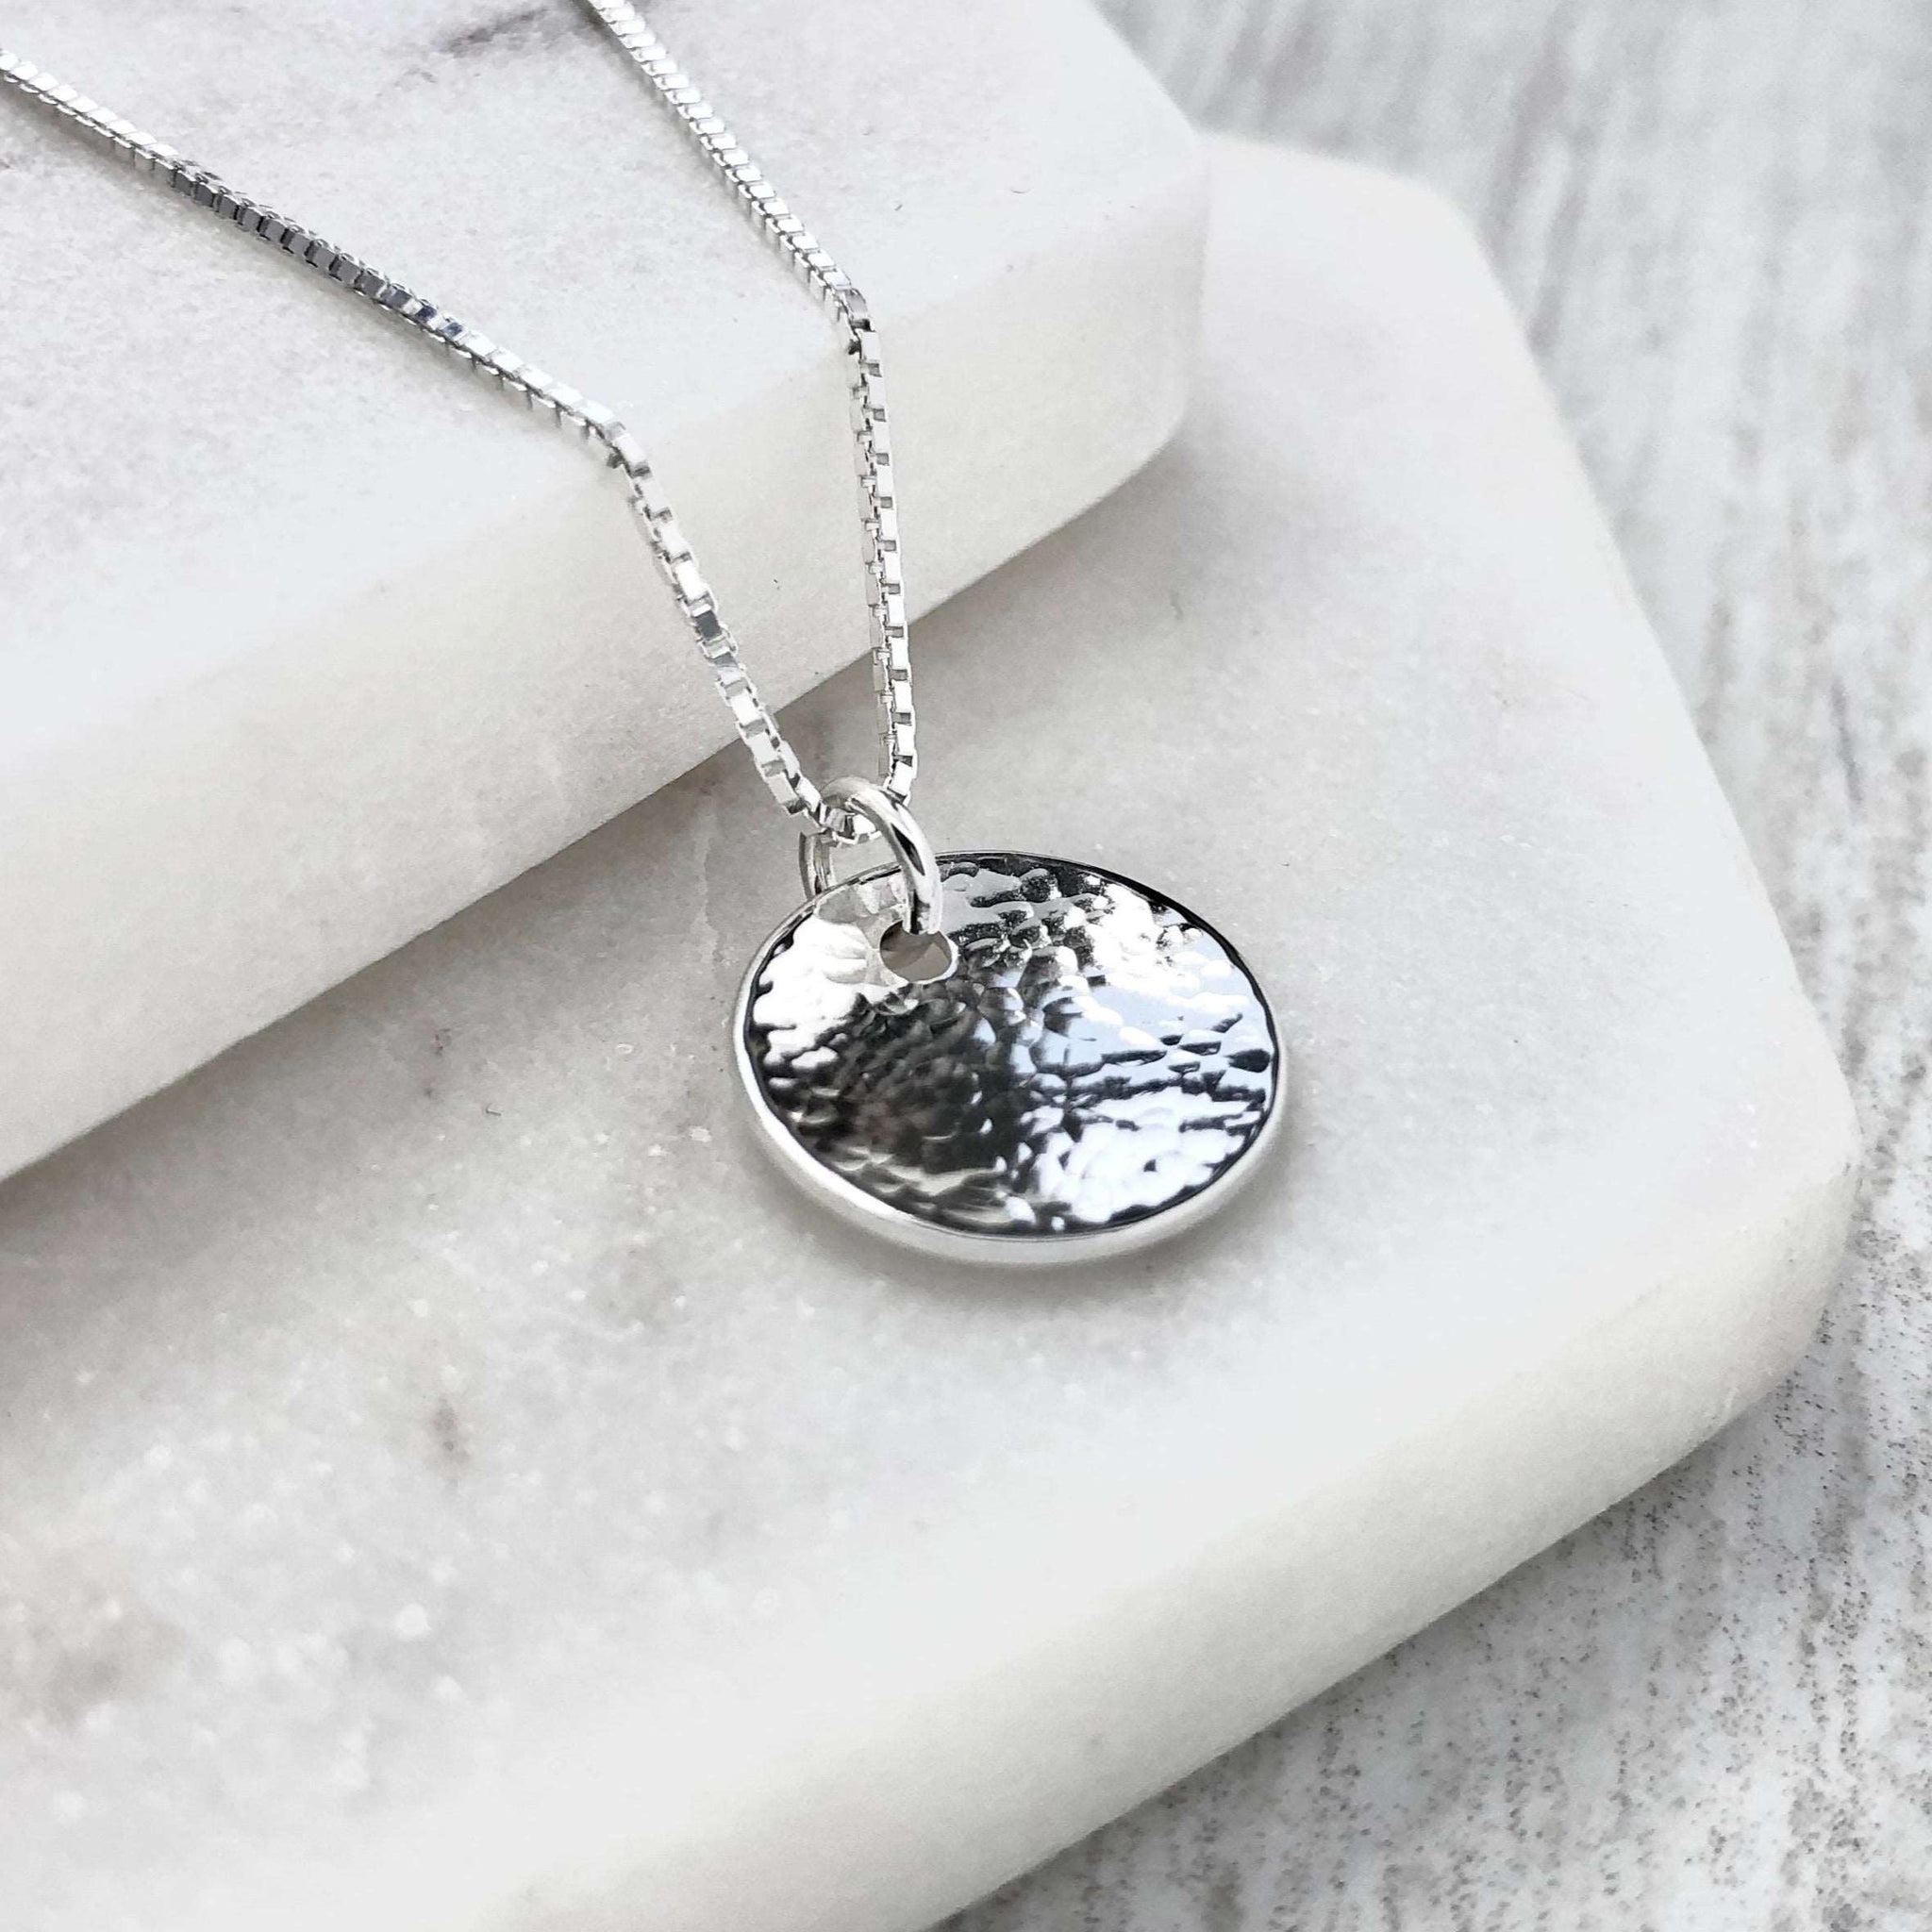 Amazon.com: Sterling Silver Hammered Disc Necklace, Handmade : Handmade  Products